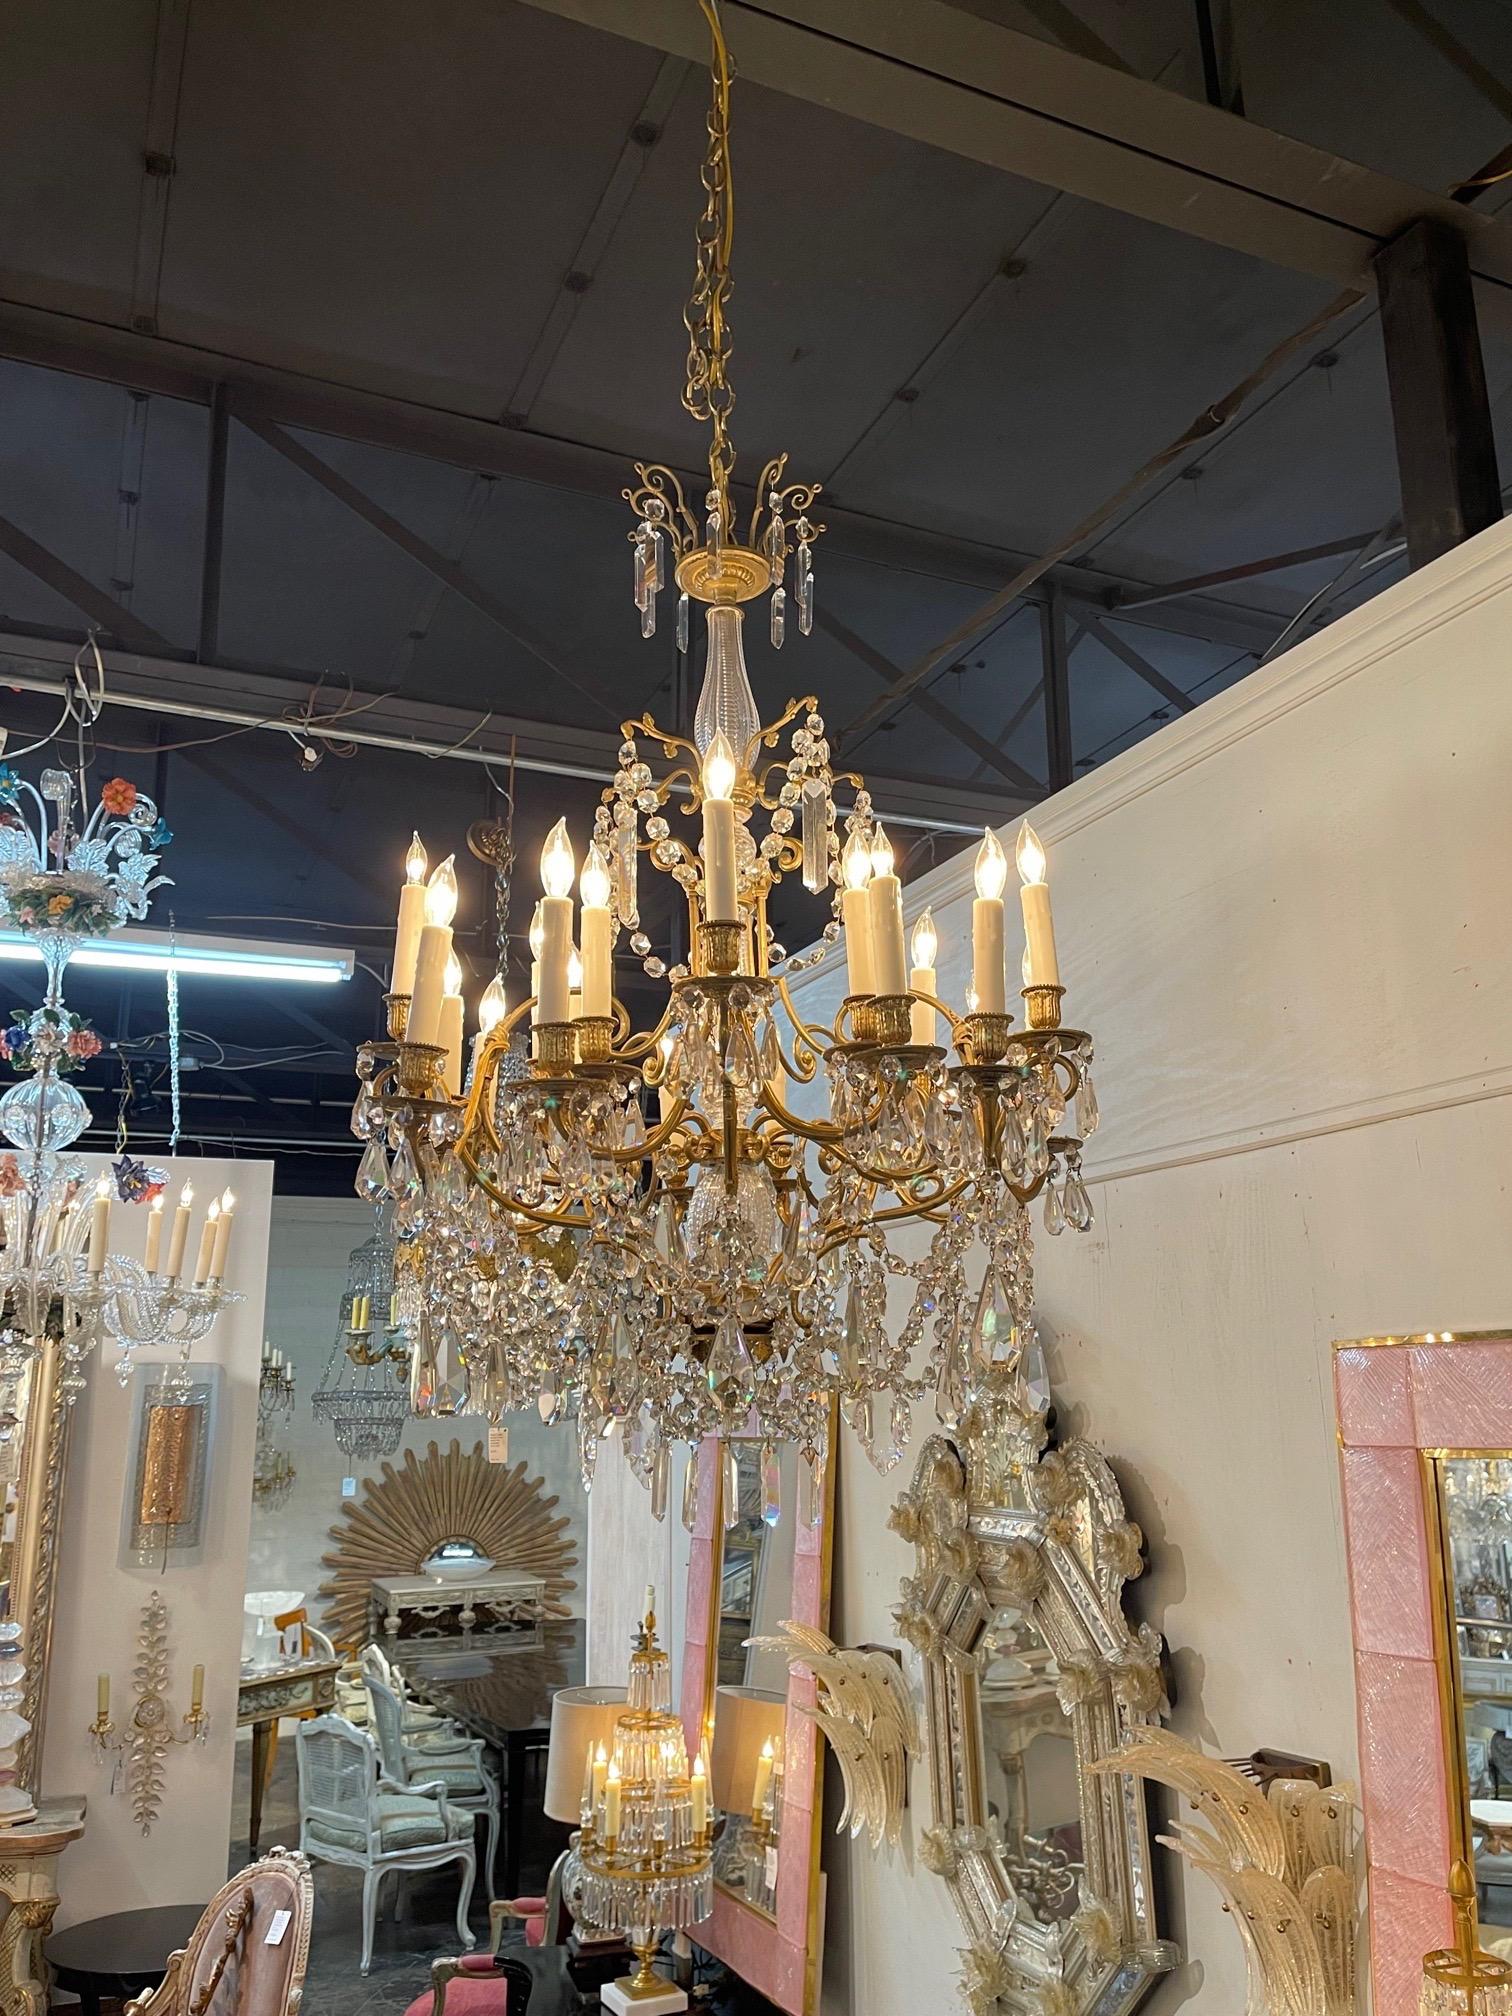 Exquisite 19th century French gilt bronze and crystal 20 light chandelier. Featuring gorgeous crystals and a beautiful decorative base. An exceptional fixture!!